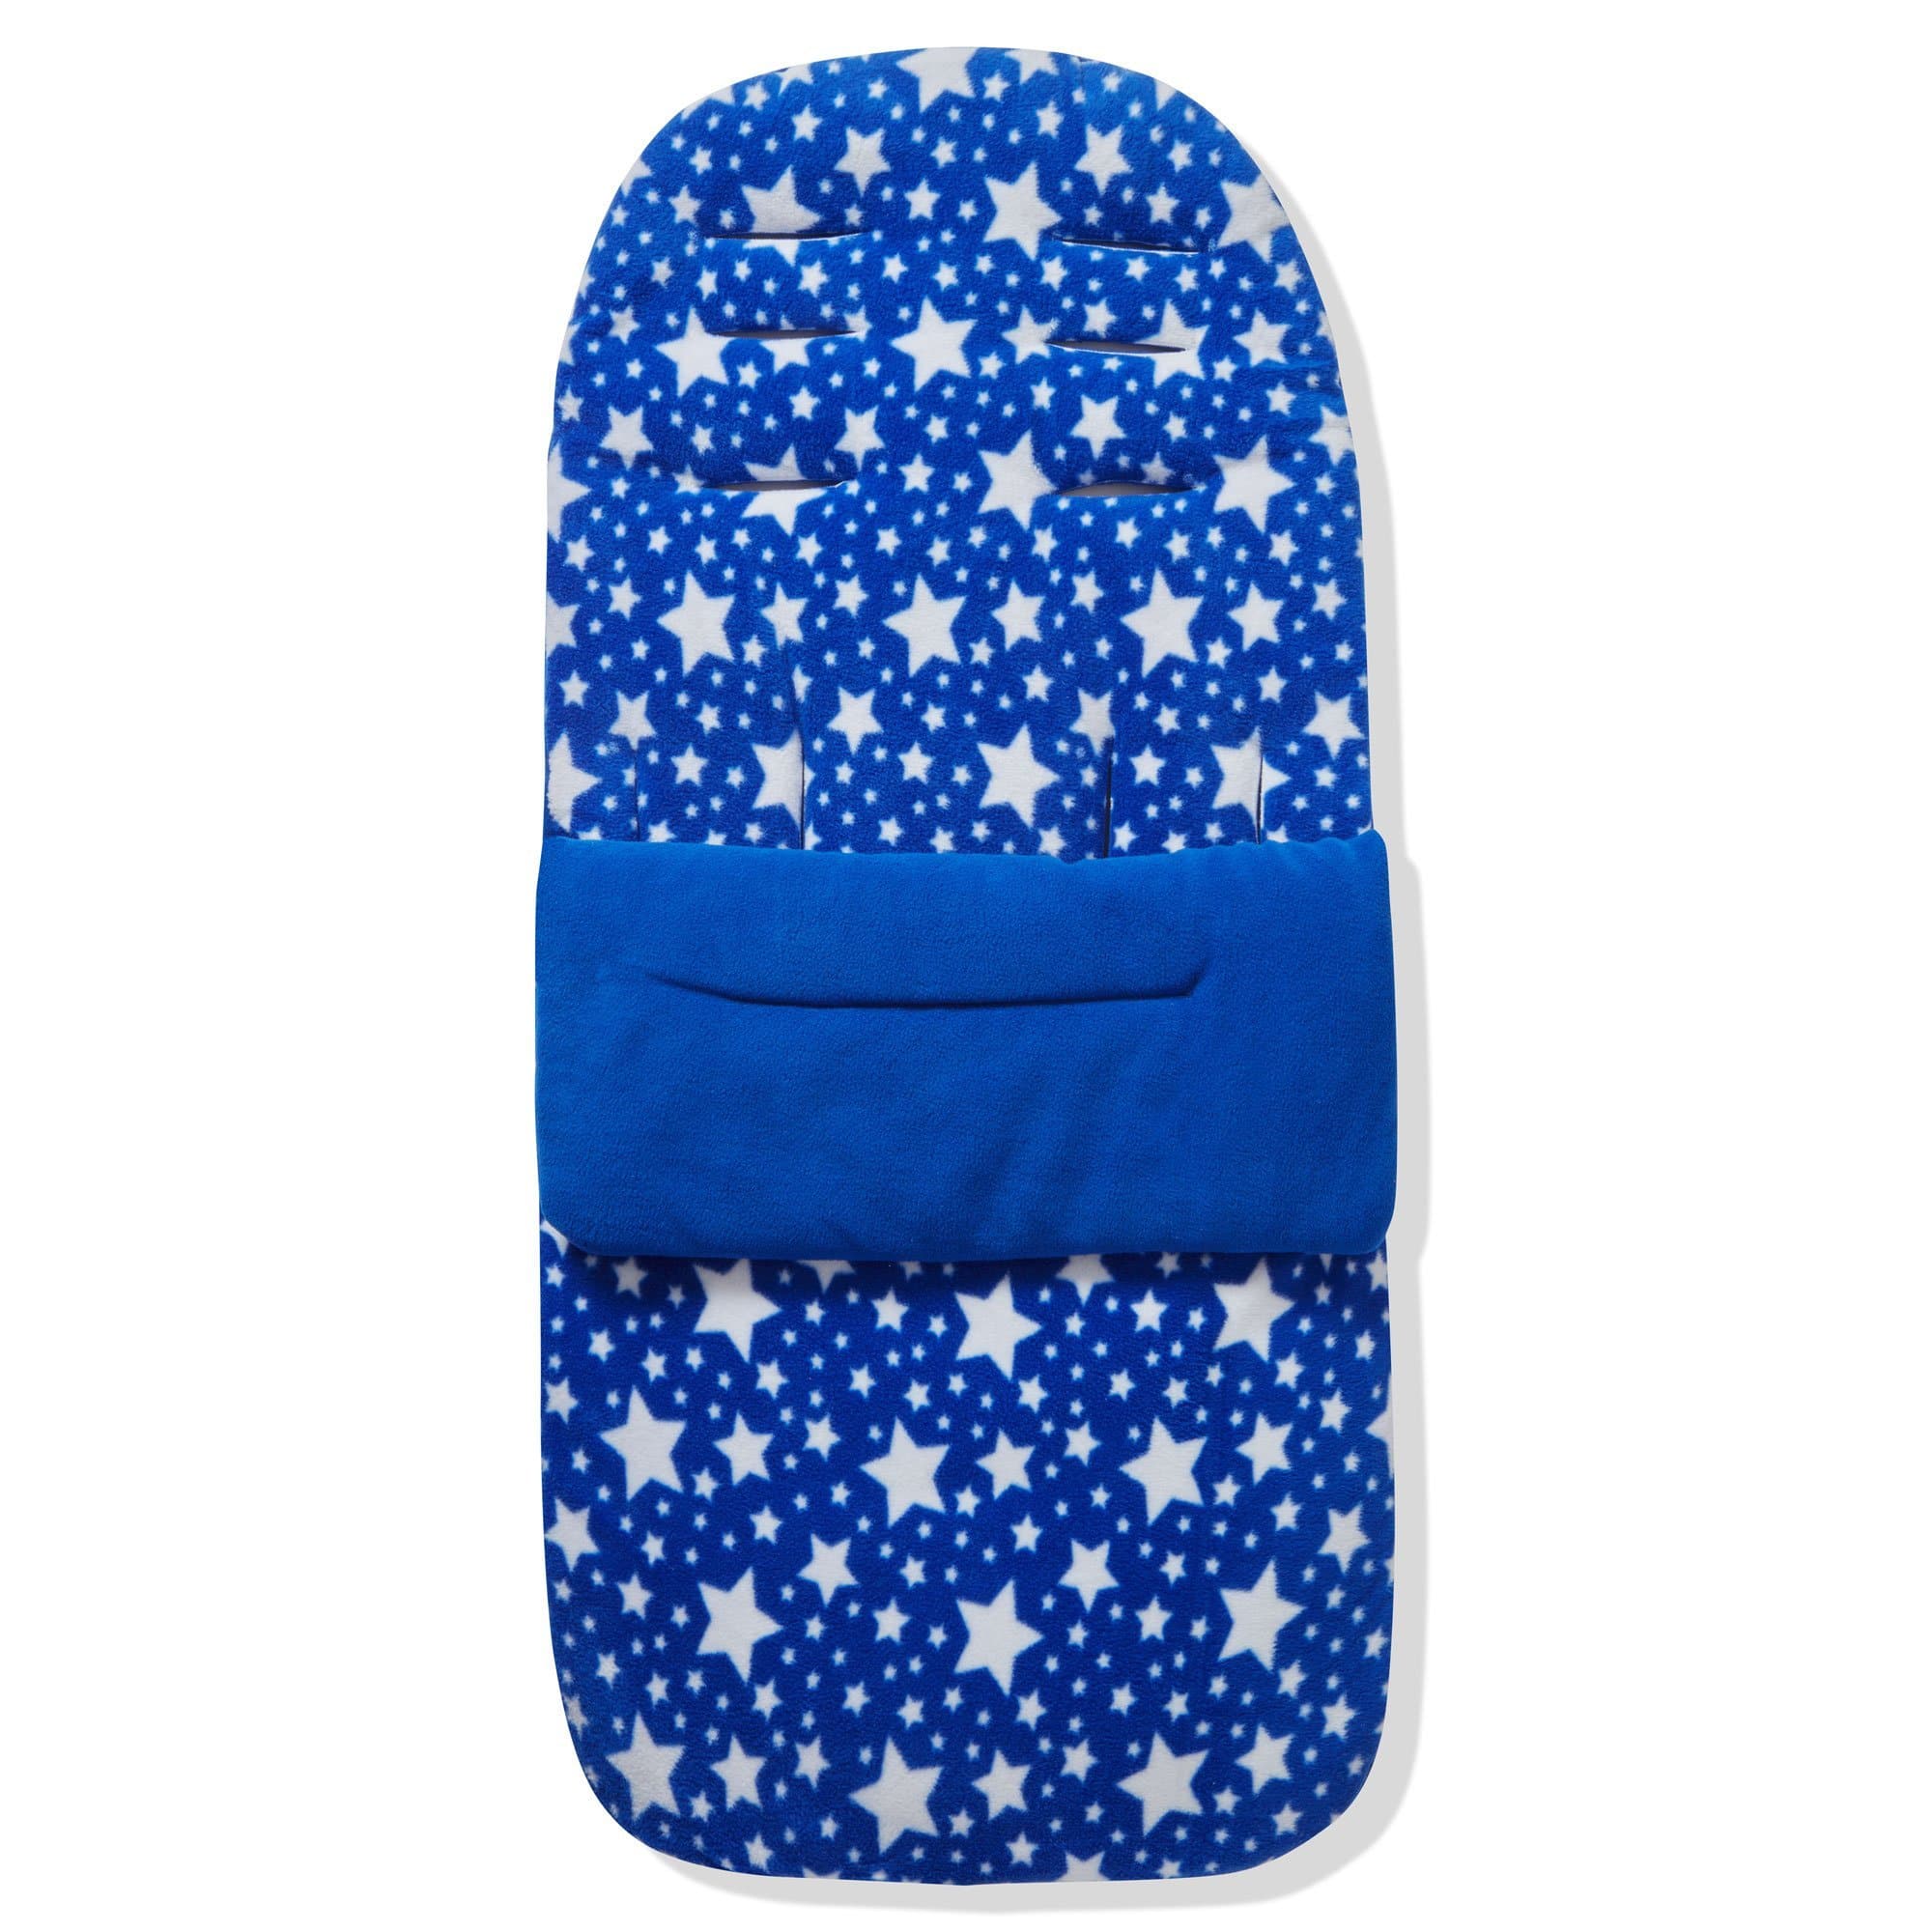 Fleece Footmuff / Cosy Toes Compatible with Egg - Blue Star / Fits All Models | For Your Little One